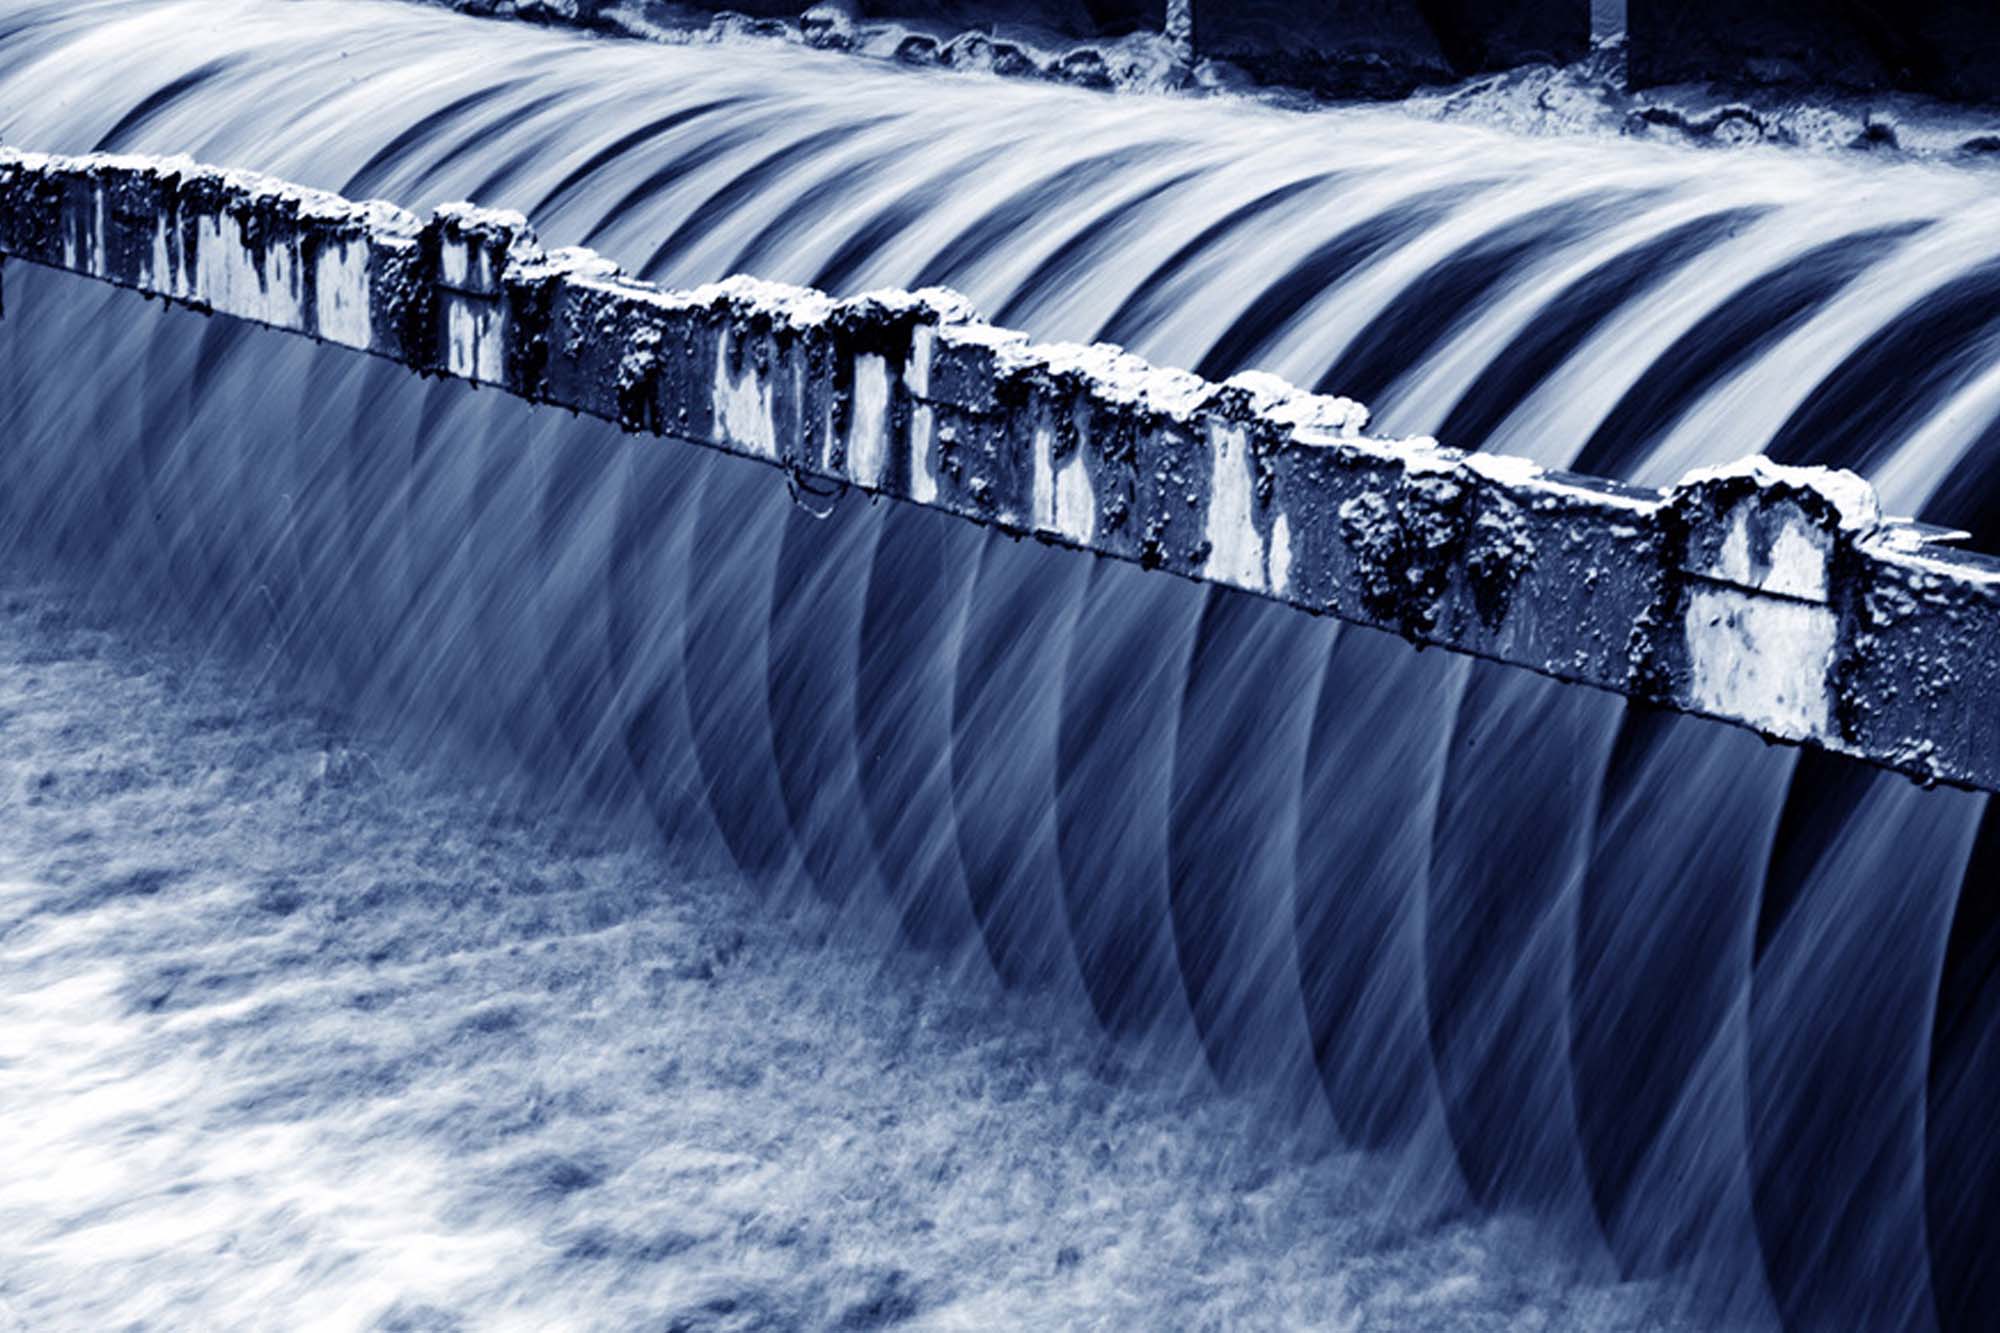 Optimal wastewater management in manufacturing